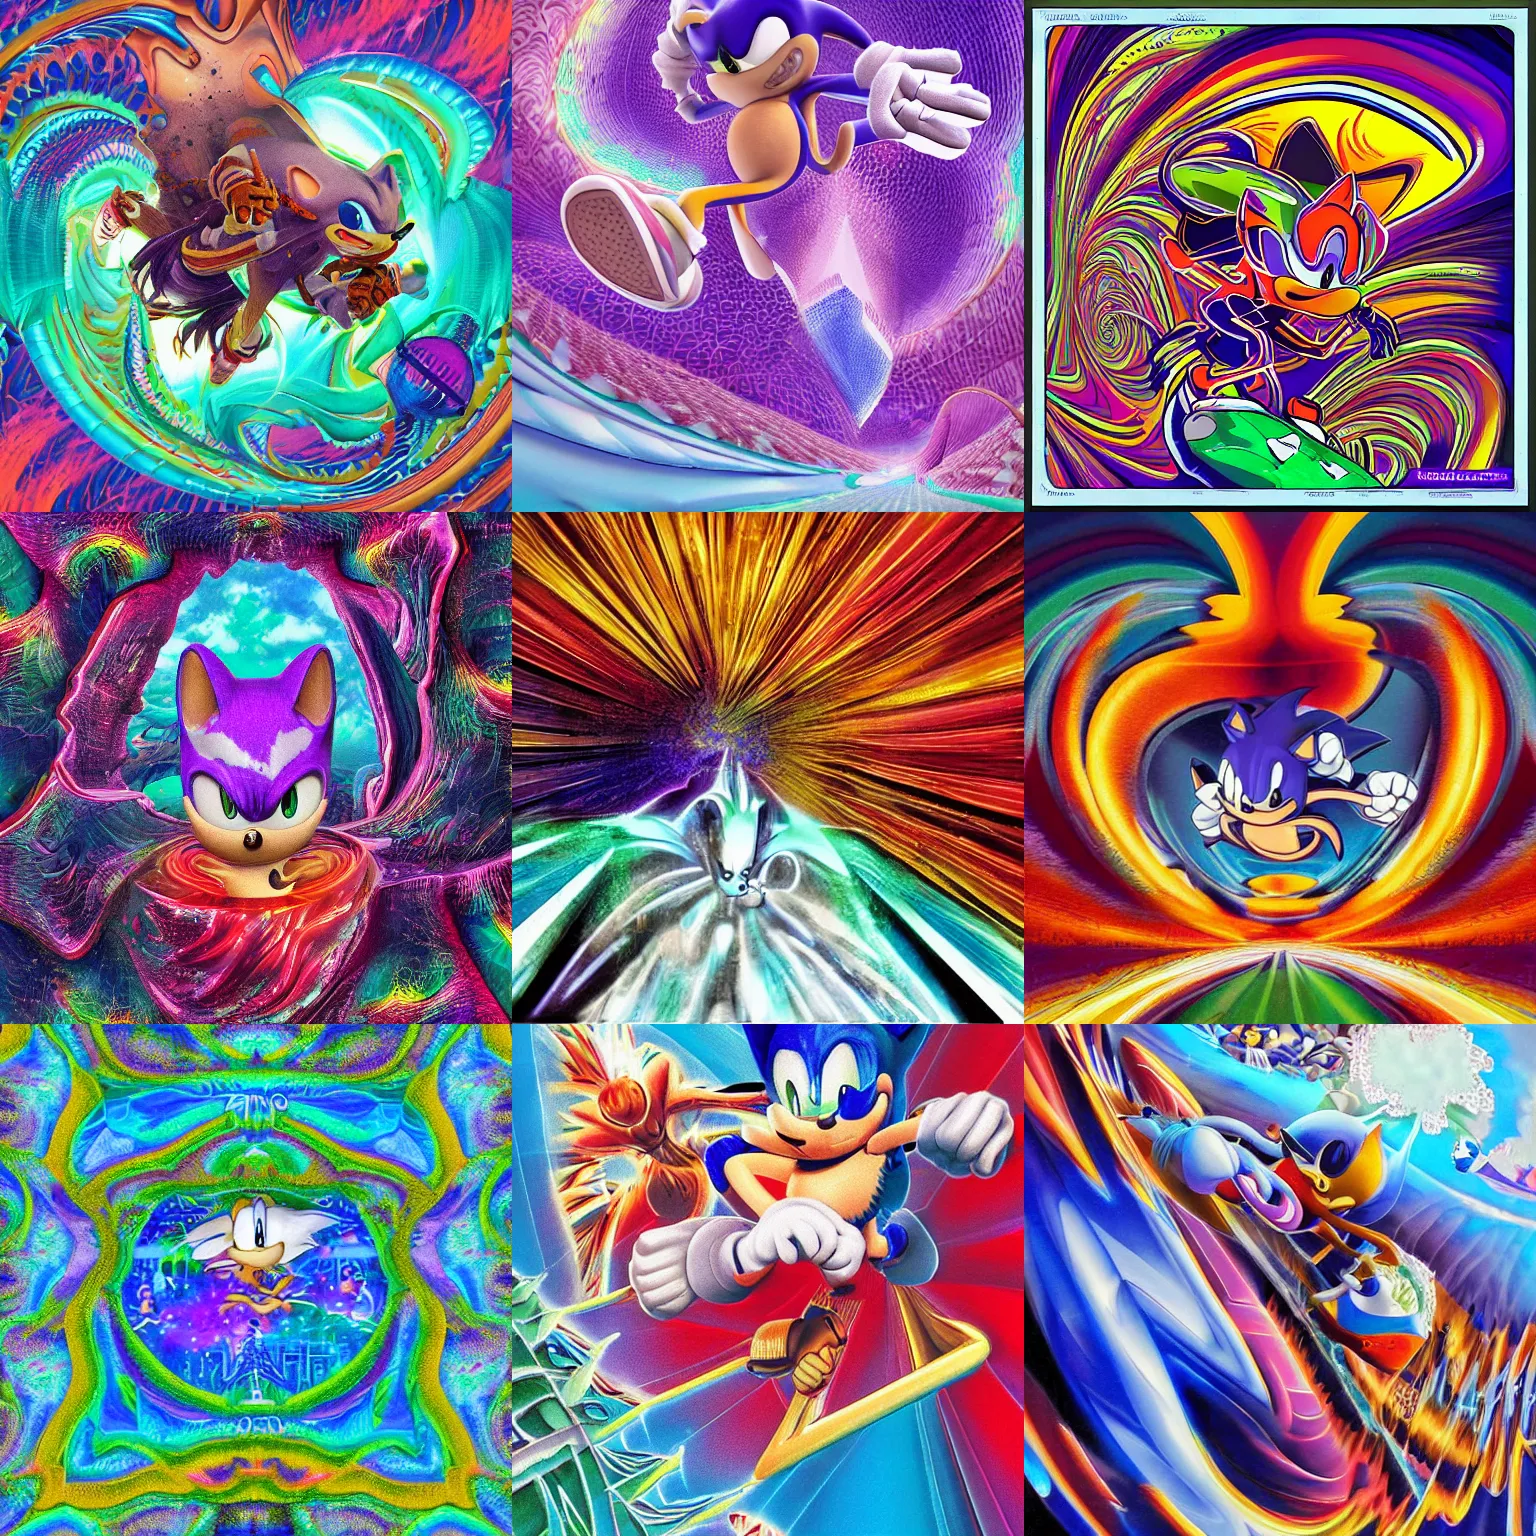 Prompt: sonic portrait of surreal, sharp, detailed professional, high quality airbrush art MGMT album cover of a liquid dissolving LSD DMT sonic the hedgehog surfing through fractal tunnels, purple checkerboard background, 1990s 1992 Sega Genesis video game album cover